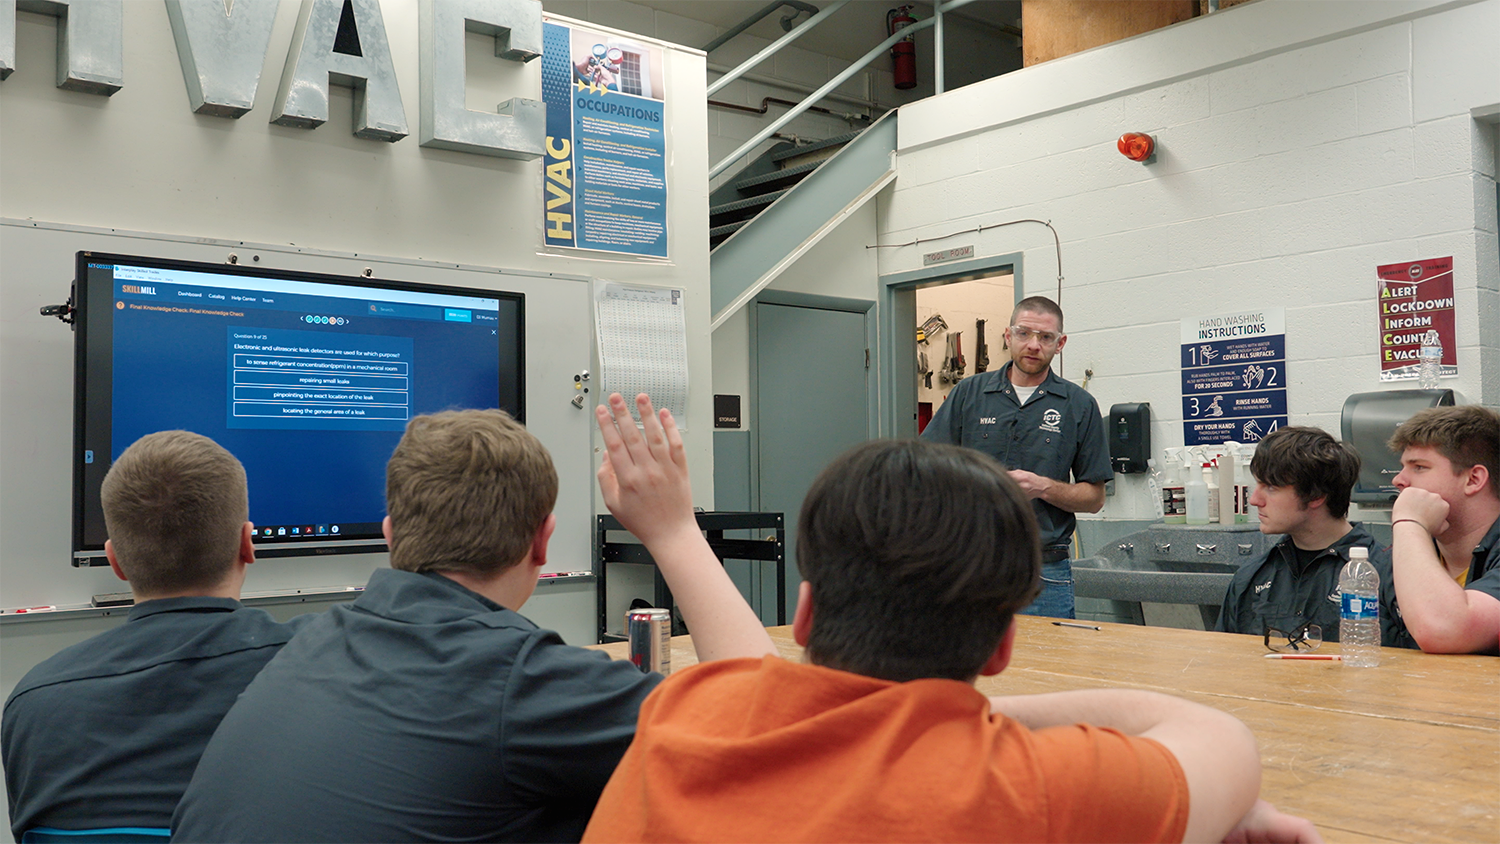 Interactive Training Tech Prepares Students to Assuredly Enter Skilled Trades Careers